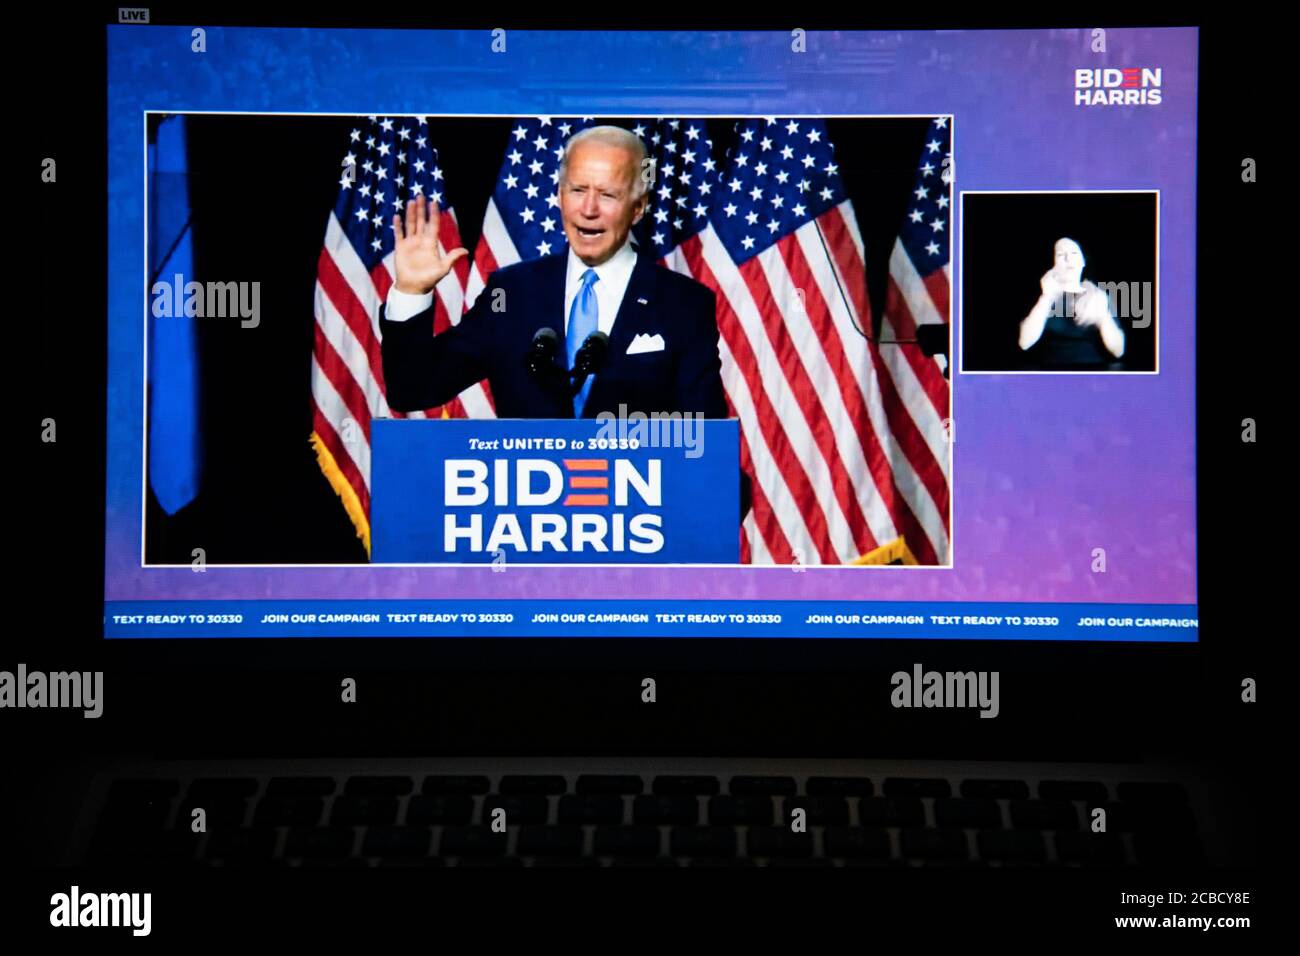 Washington, USA. 12th Aug, 2020. A photo illustration of a laptop computer screen shows presumptive Democratic Nominee for President Joe Biden speaking at a livestream event of the announcement of Sen. Kamala Harris as his Vice Presidential running mate, in Washington, DC, on August 12, 2020 amid the Coronavirus pandemic. Sen. Harris is the first woman of color running for Vice President on a major party ticket. (Graeme Sloan/Sipa USA) Credit: Sipa USA/Alamy Live News Stock Photo